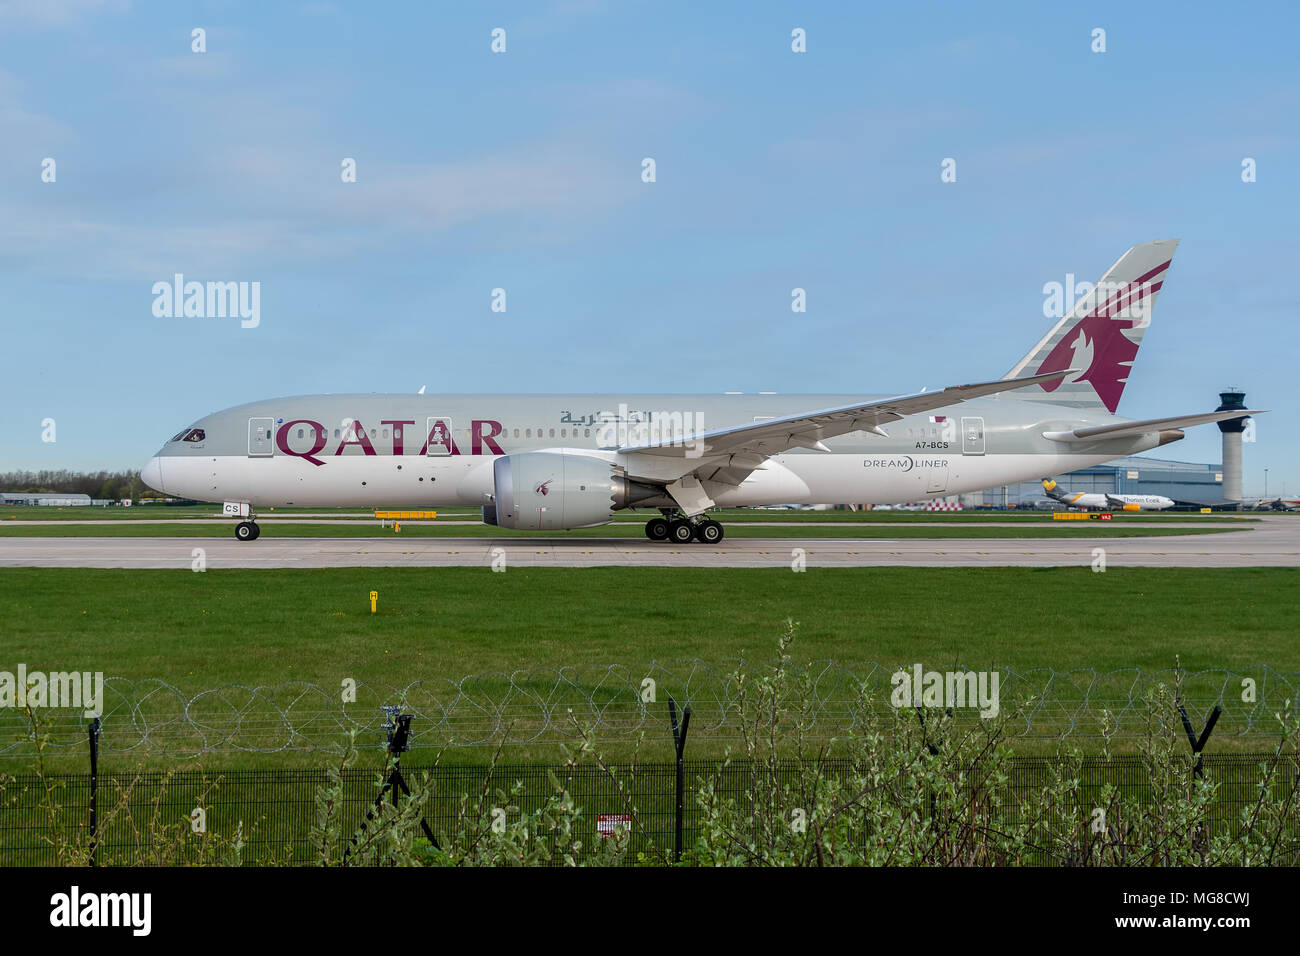 MANCHESTER, UNITED KINGDOM - APRIL 21st, 2018: Qatar airways Boeing 787 Dreamliner ready to depart at Manchester Airport Stock Photo